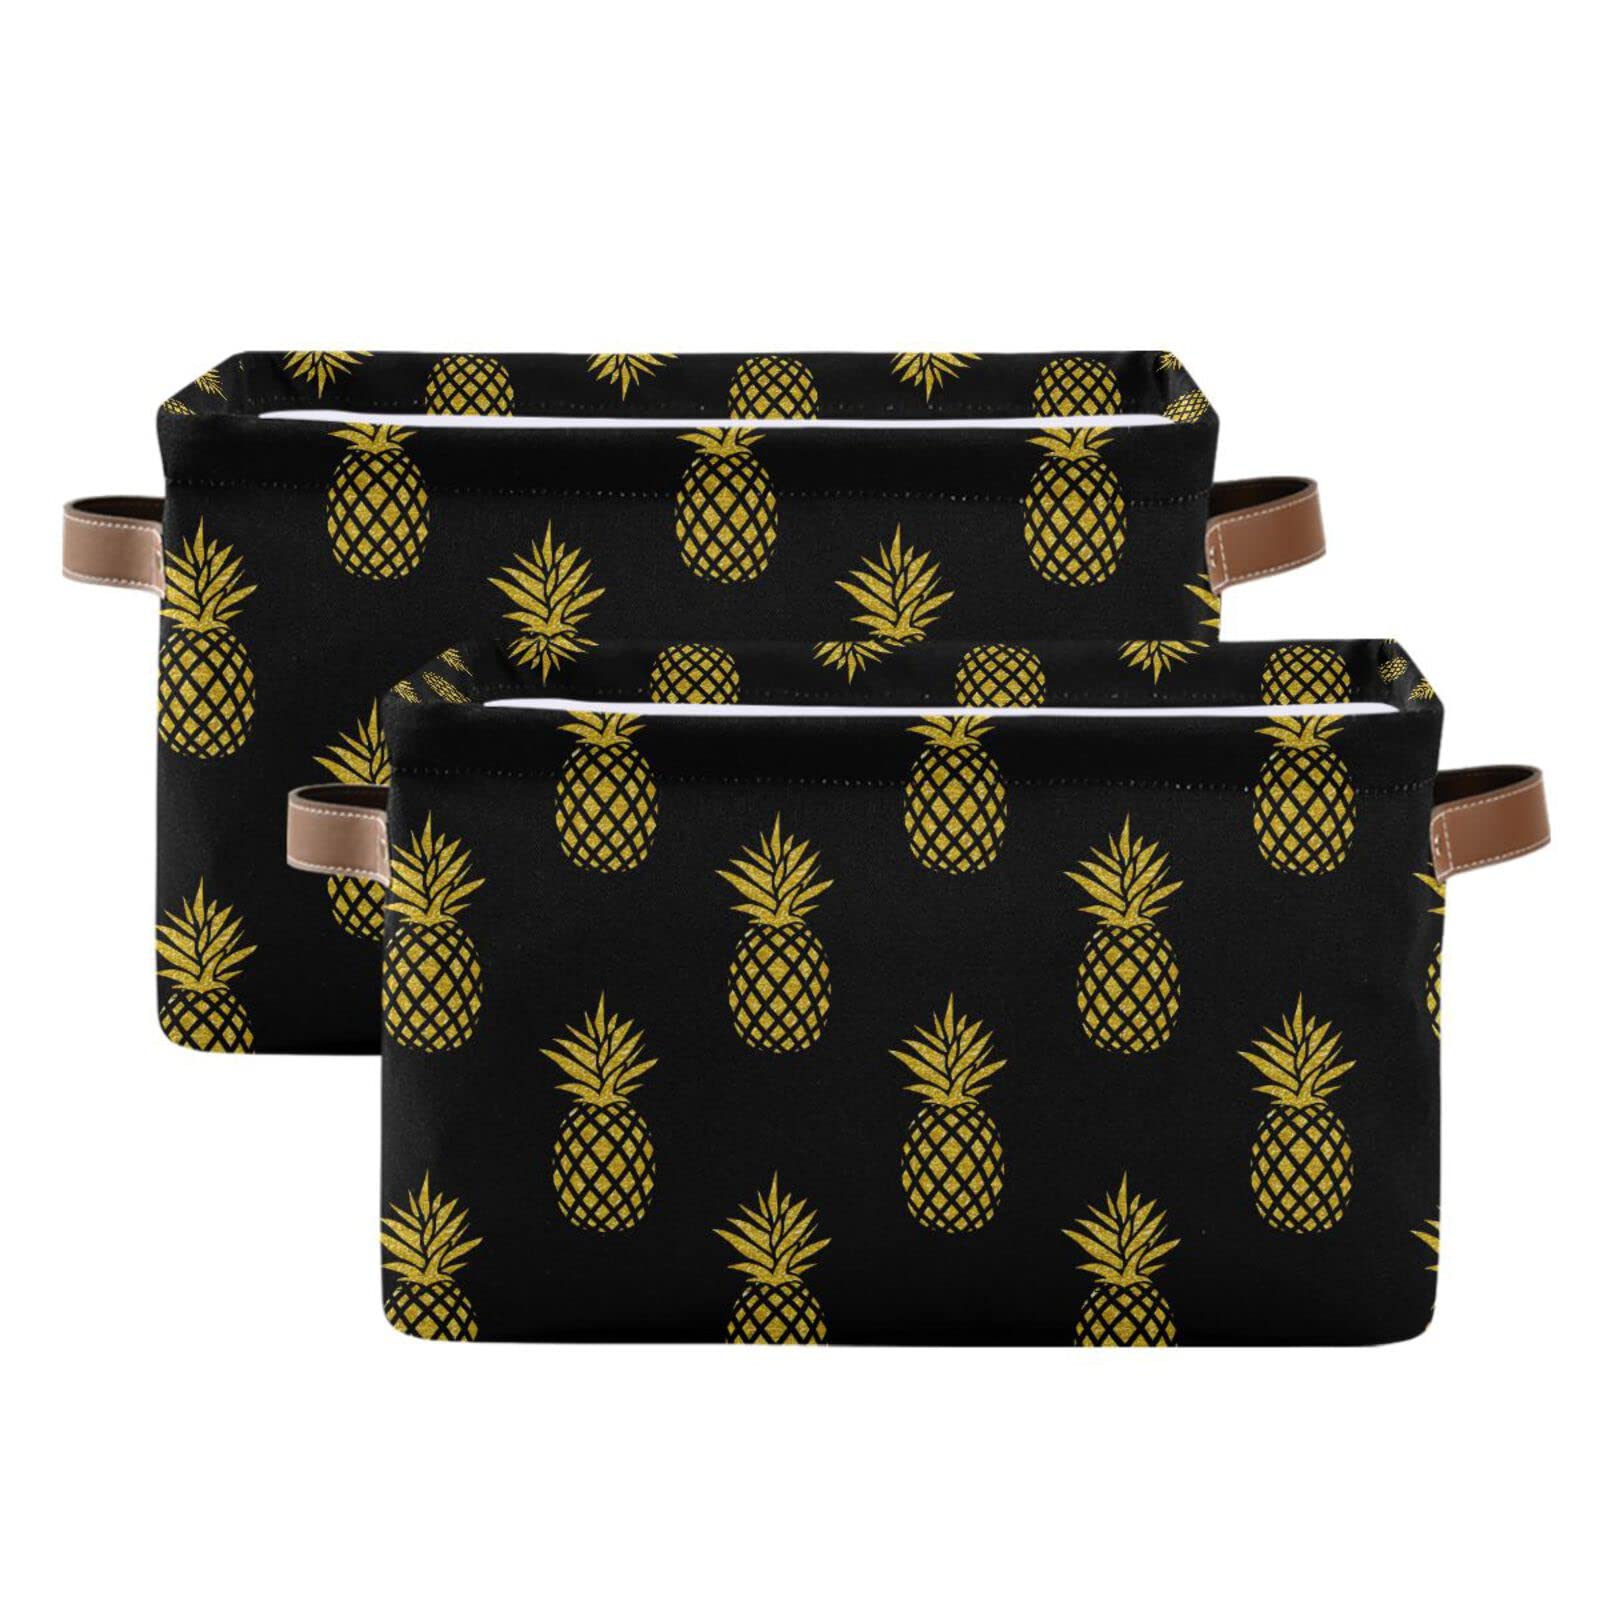 ALAZA Gold Pineapple on Black Large Storage Baskets with Handles Foldable Decorative 2 Pack Storage Bins Boxes for Organizing Living Room Shelves Office Closet Clothes